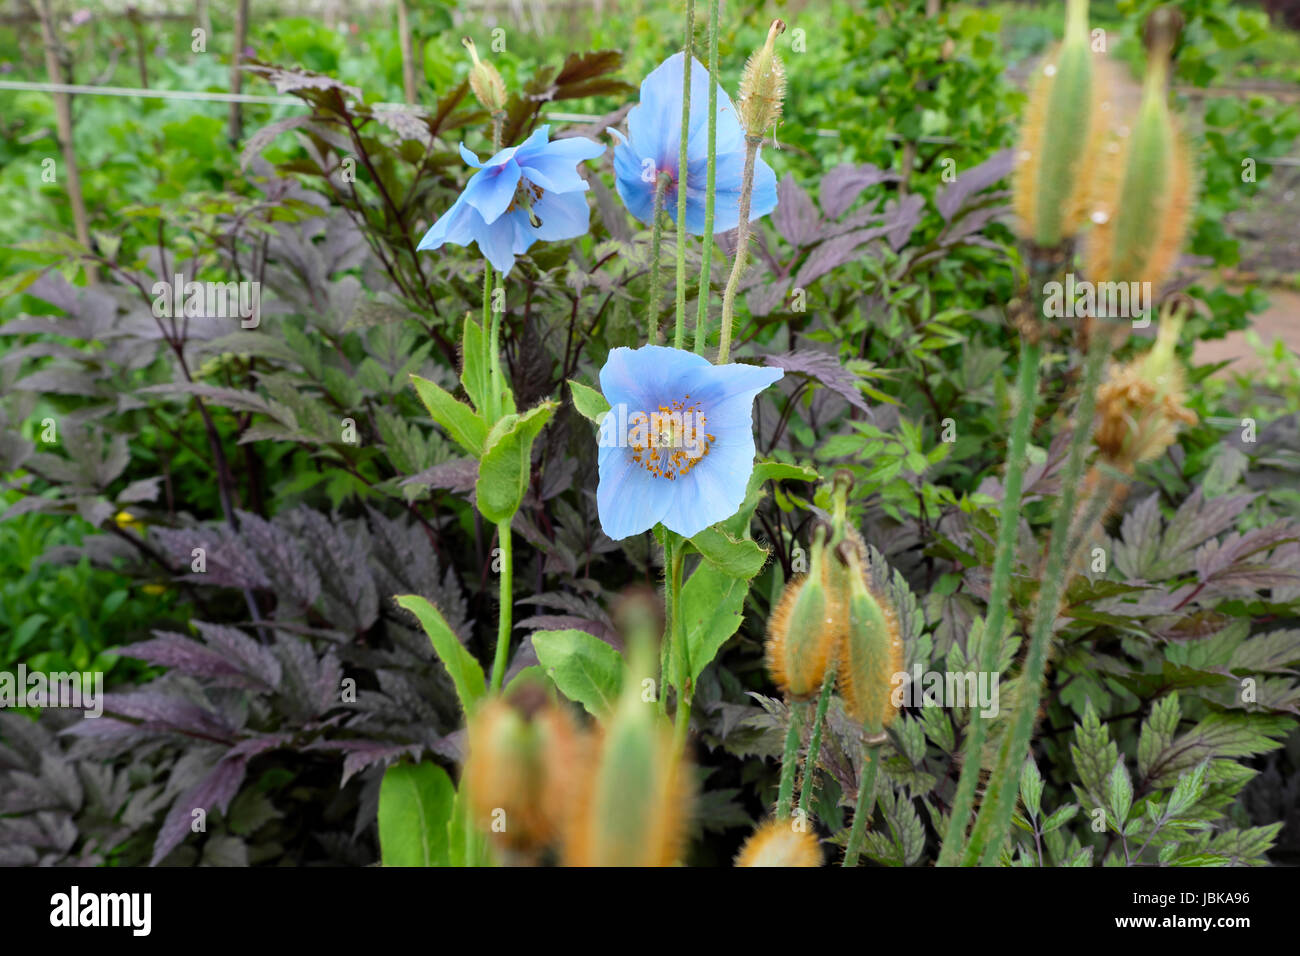 Meconopsis betonicifolia  growing outside in summer in herbaceous border at the National Botanic Garden of Wales in Carmarthenshire UK   KATHY DEWITT Stock Photo